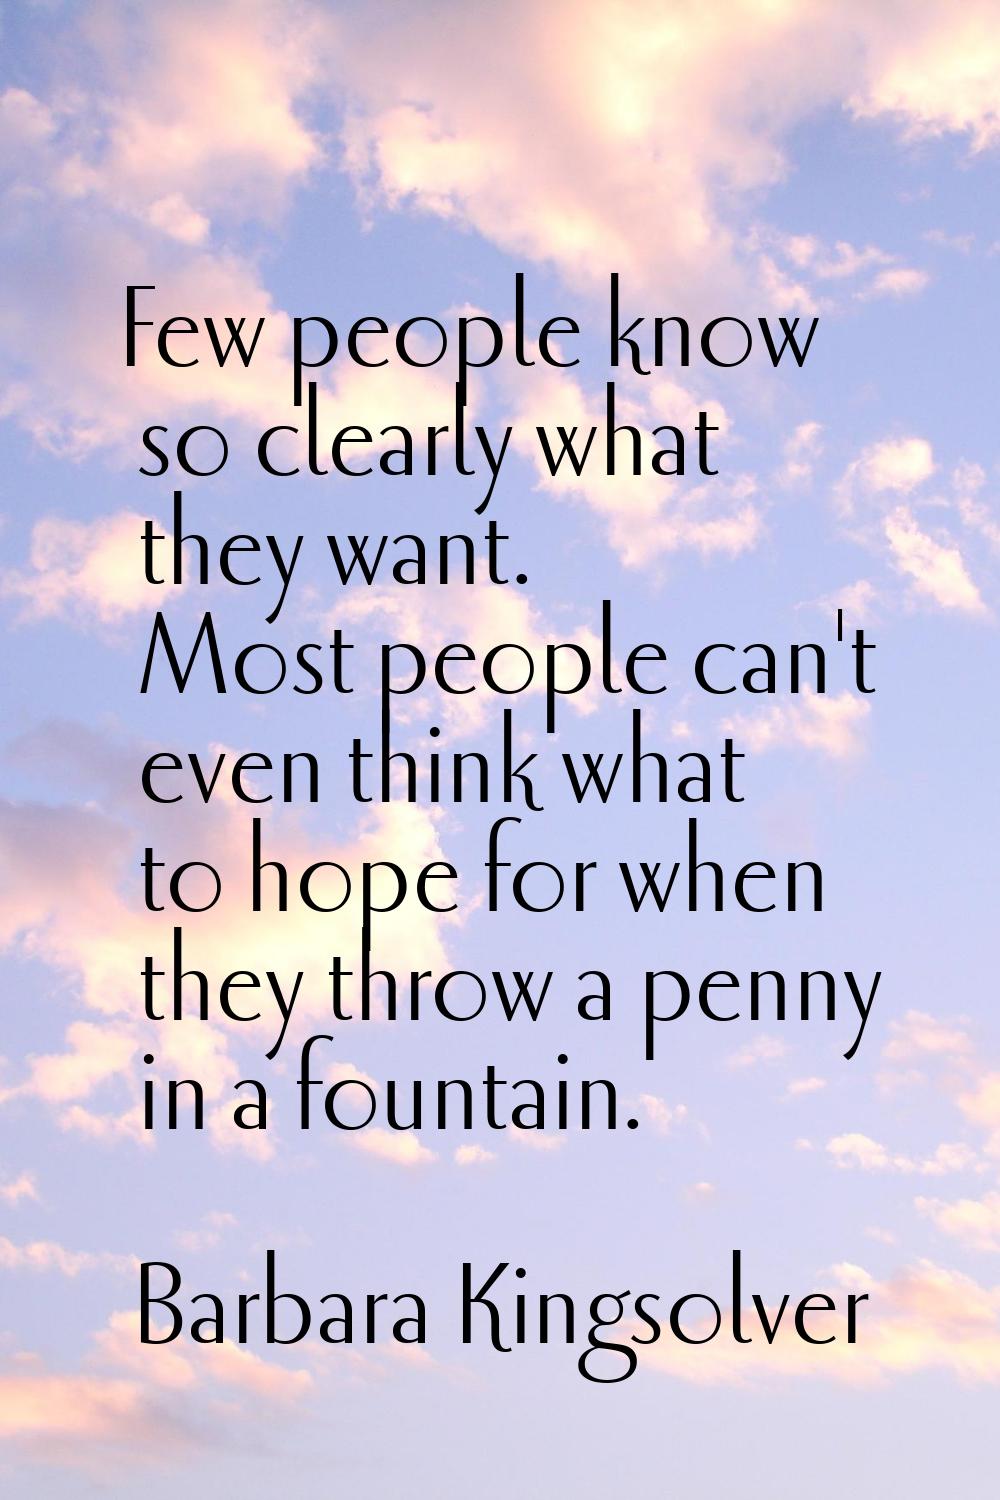 Few people know so clearly what they want. Most people can't even think what to hope for when they 